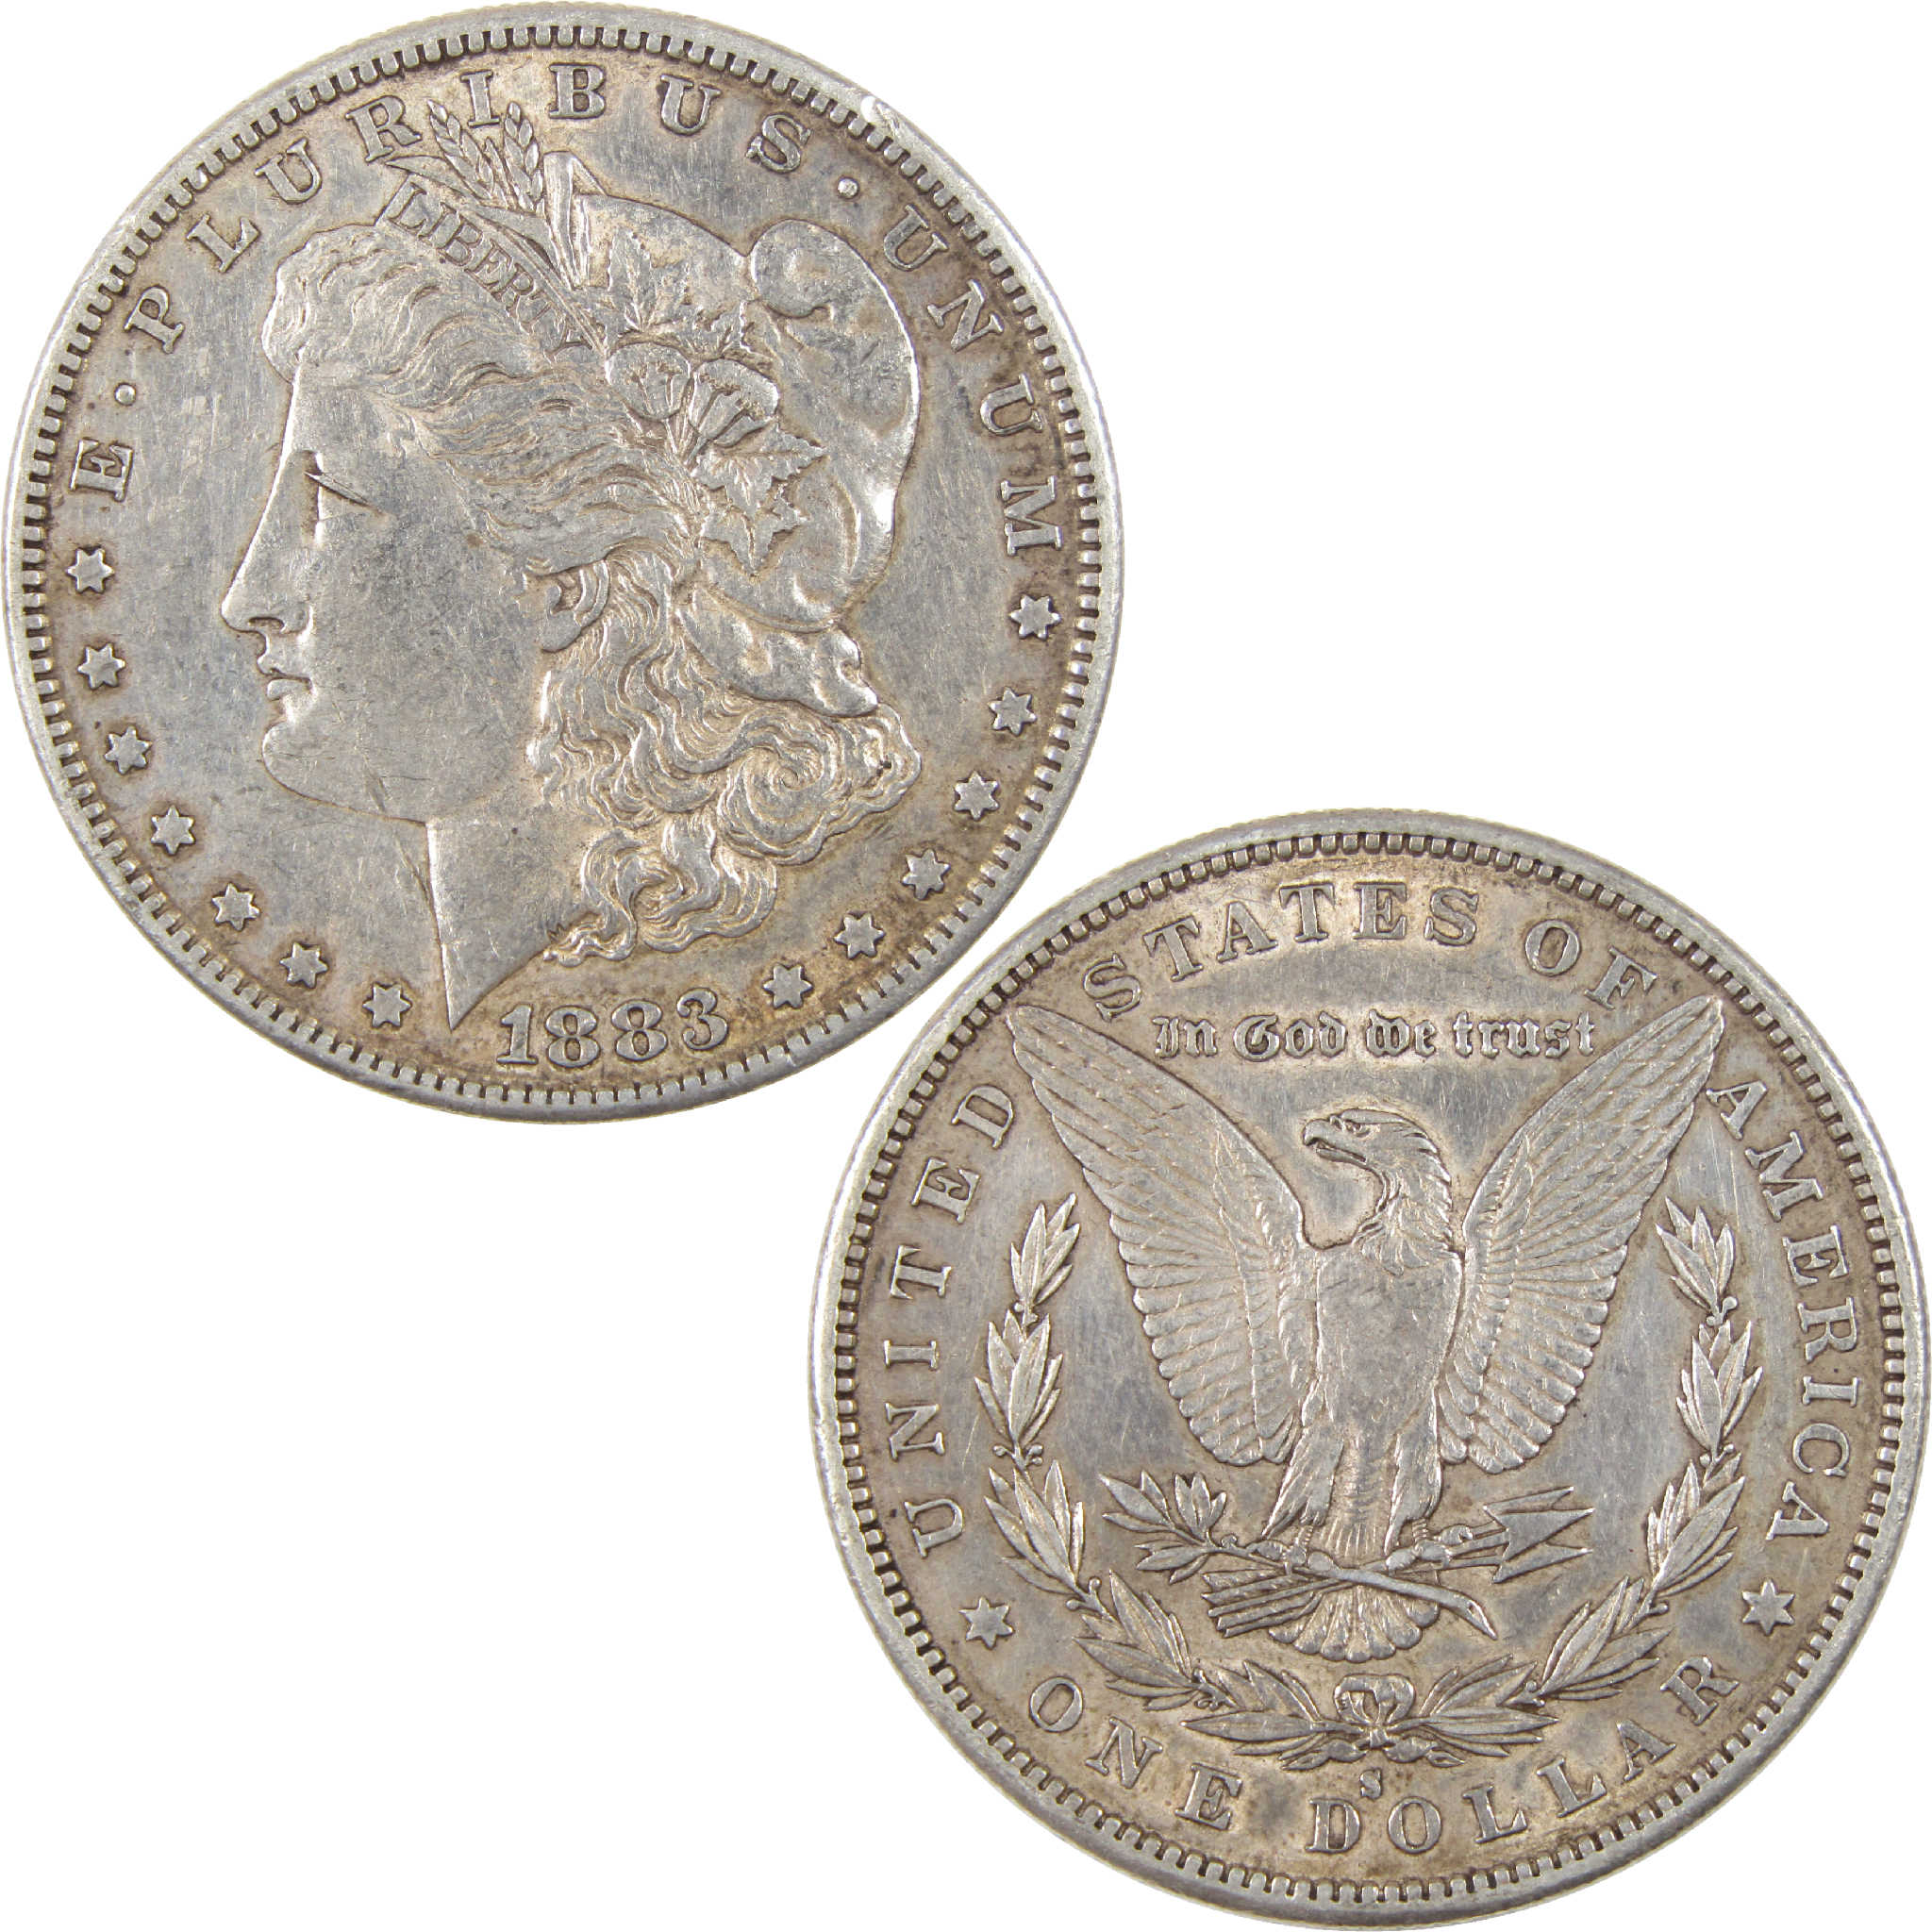 1883 S Morgan Dollar XF EF Extremely Fine Silver $1 Coin SKU:I11278 - Morgan coin - Morgan silver dollar - Morgan silver dollar for sale - Profile Coins &amp; Collectibles